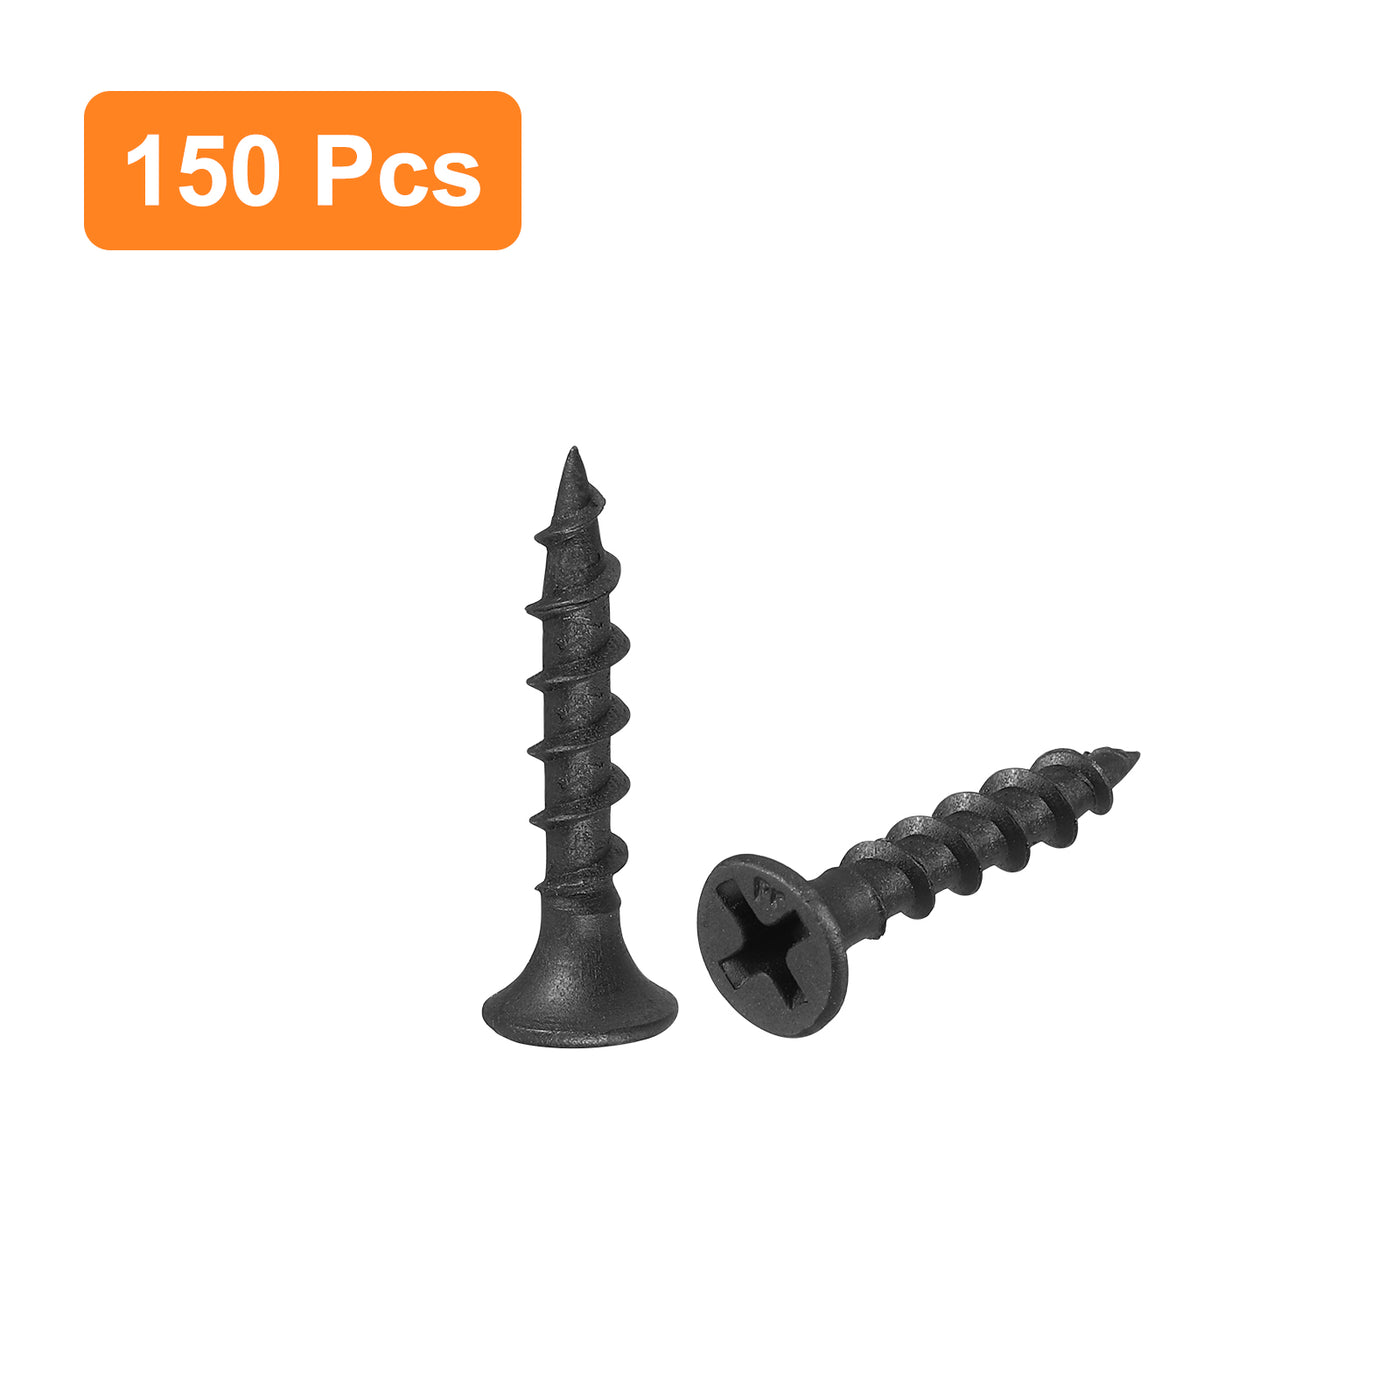 uxcell Uxcell M3.8x25mm 150pcs Phillips Drive Wood Screws, Carbon Steel Self Tapping Screws